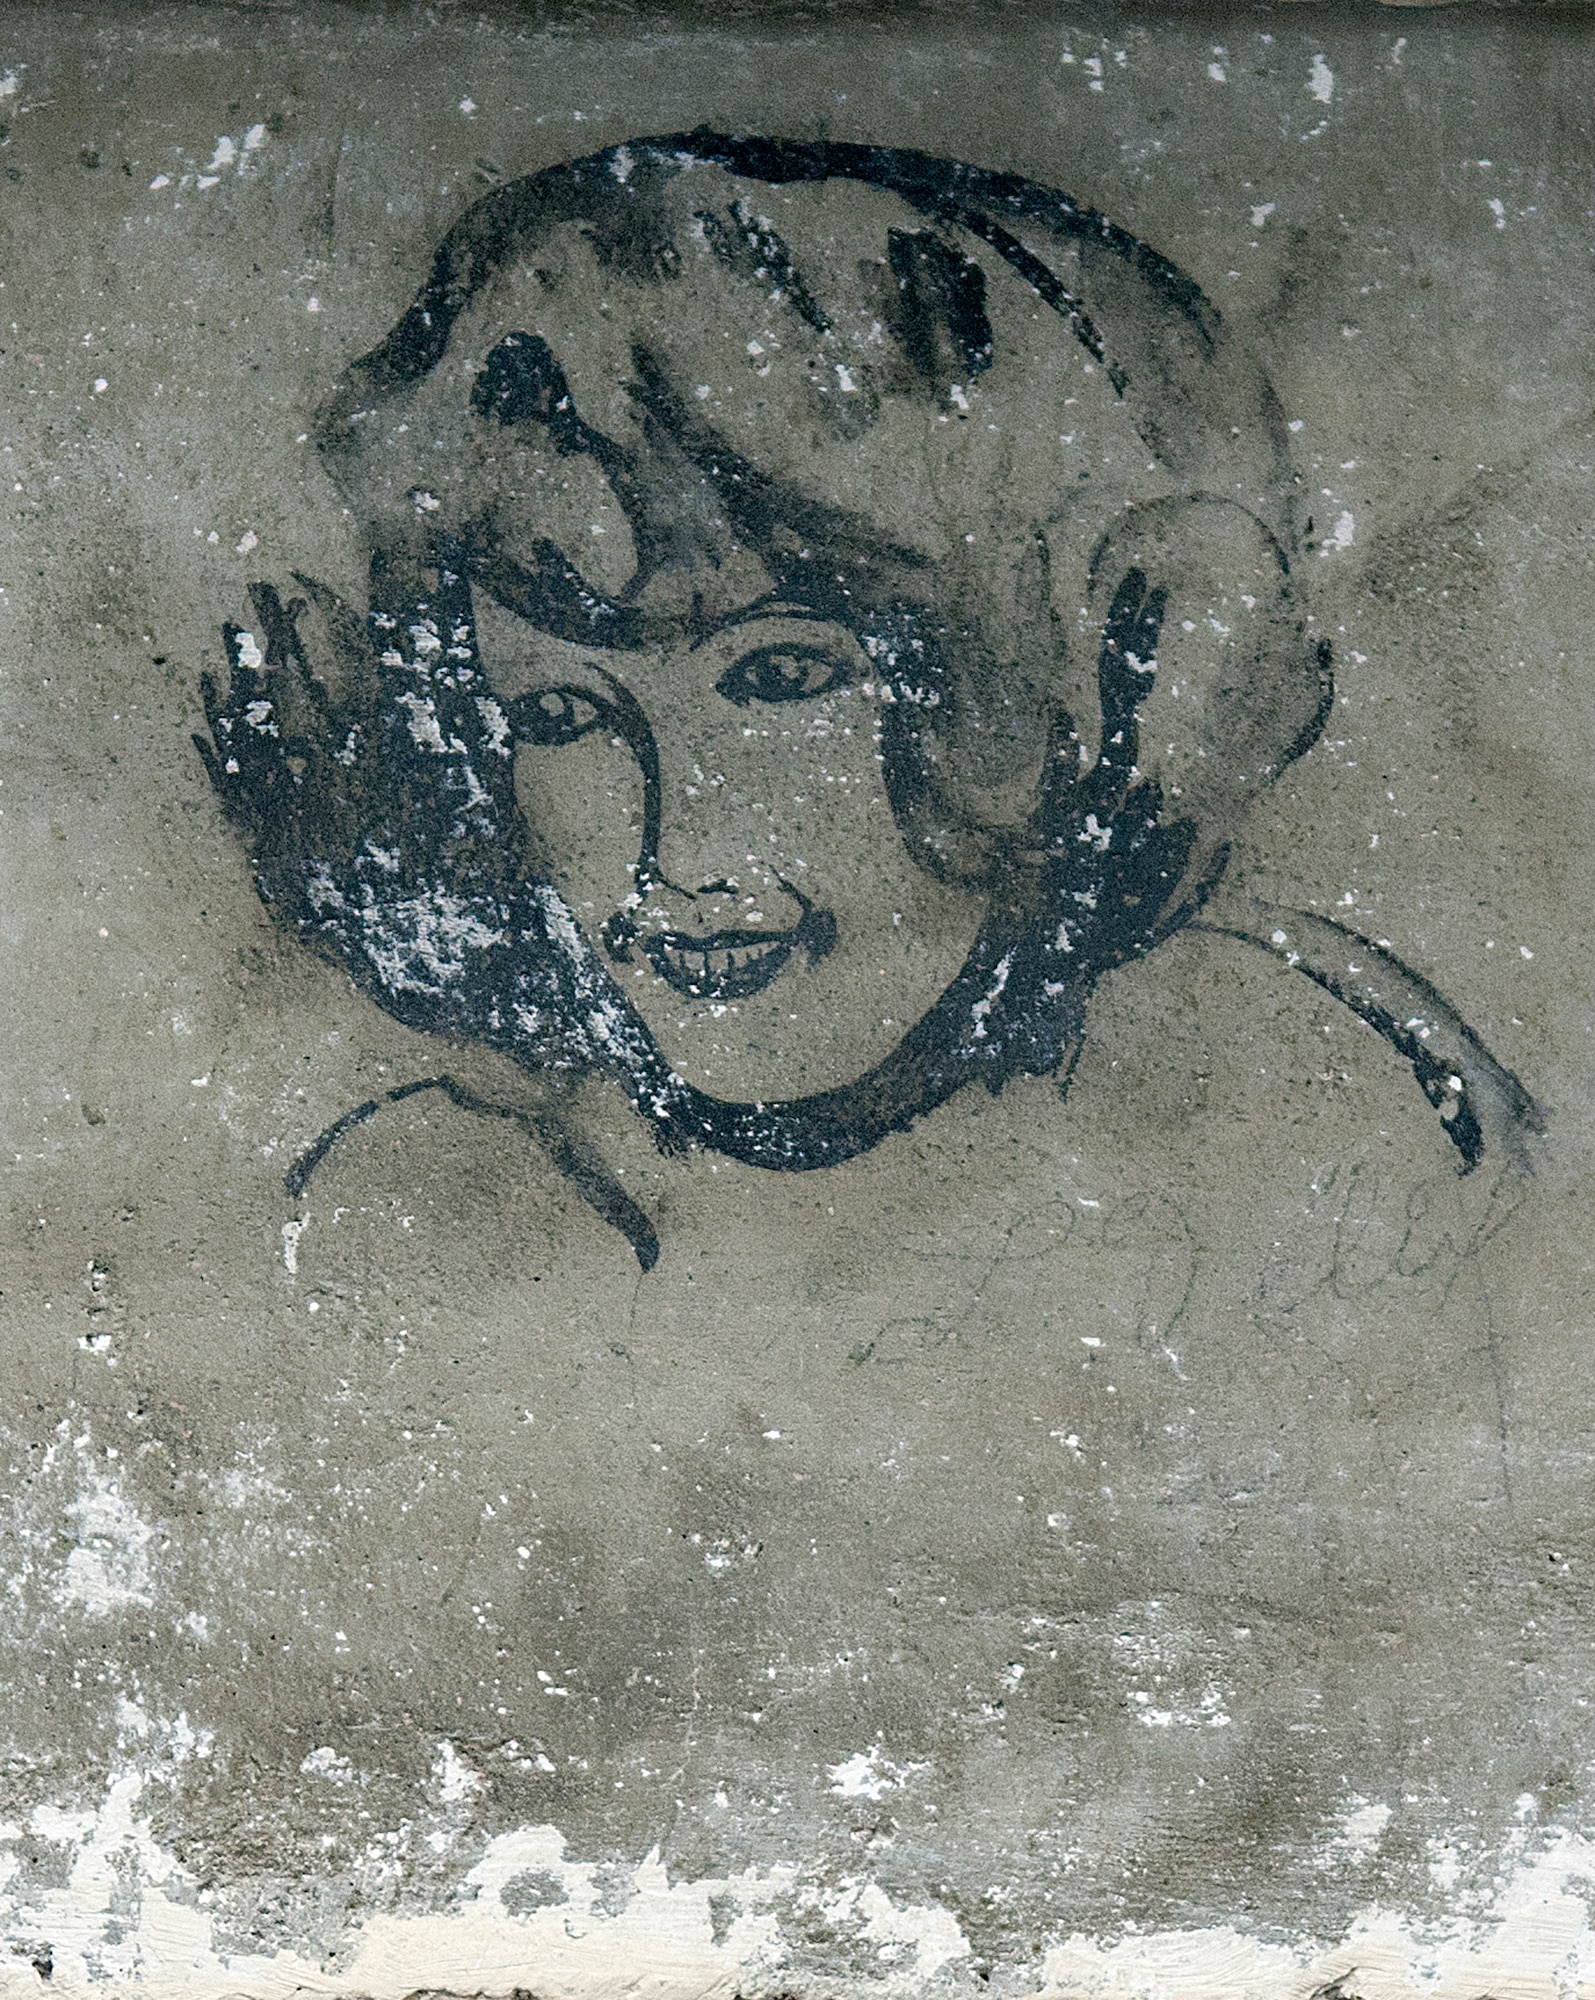 A sketch of a young woman looks down from the cement wall over the door into the F. E. Warren Air Force Base curation facility known as “the bunker.” The artwork, believed to have been drawn sometime around 1920, is just one of many pieces of graffiti discovered as decades of paint was stripped from the walls when an old potato storage cellar was converted into a state-of-the-art archive for historical documents and artifacts. (U.S. Air Force photo by R.J. Oriez)